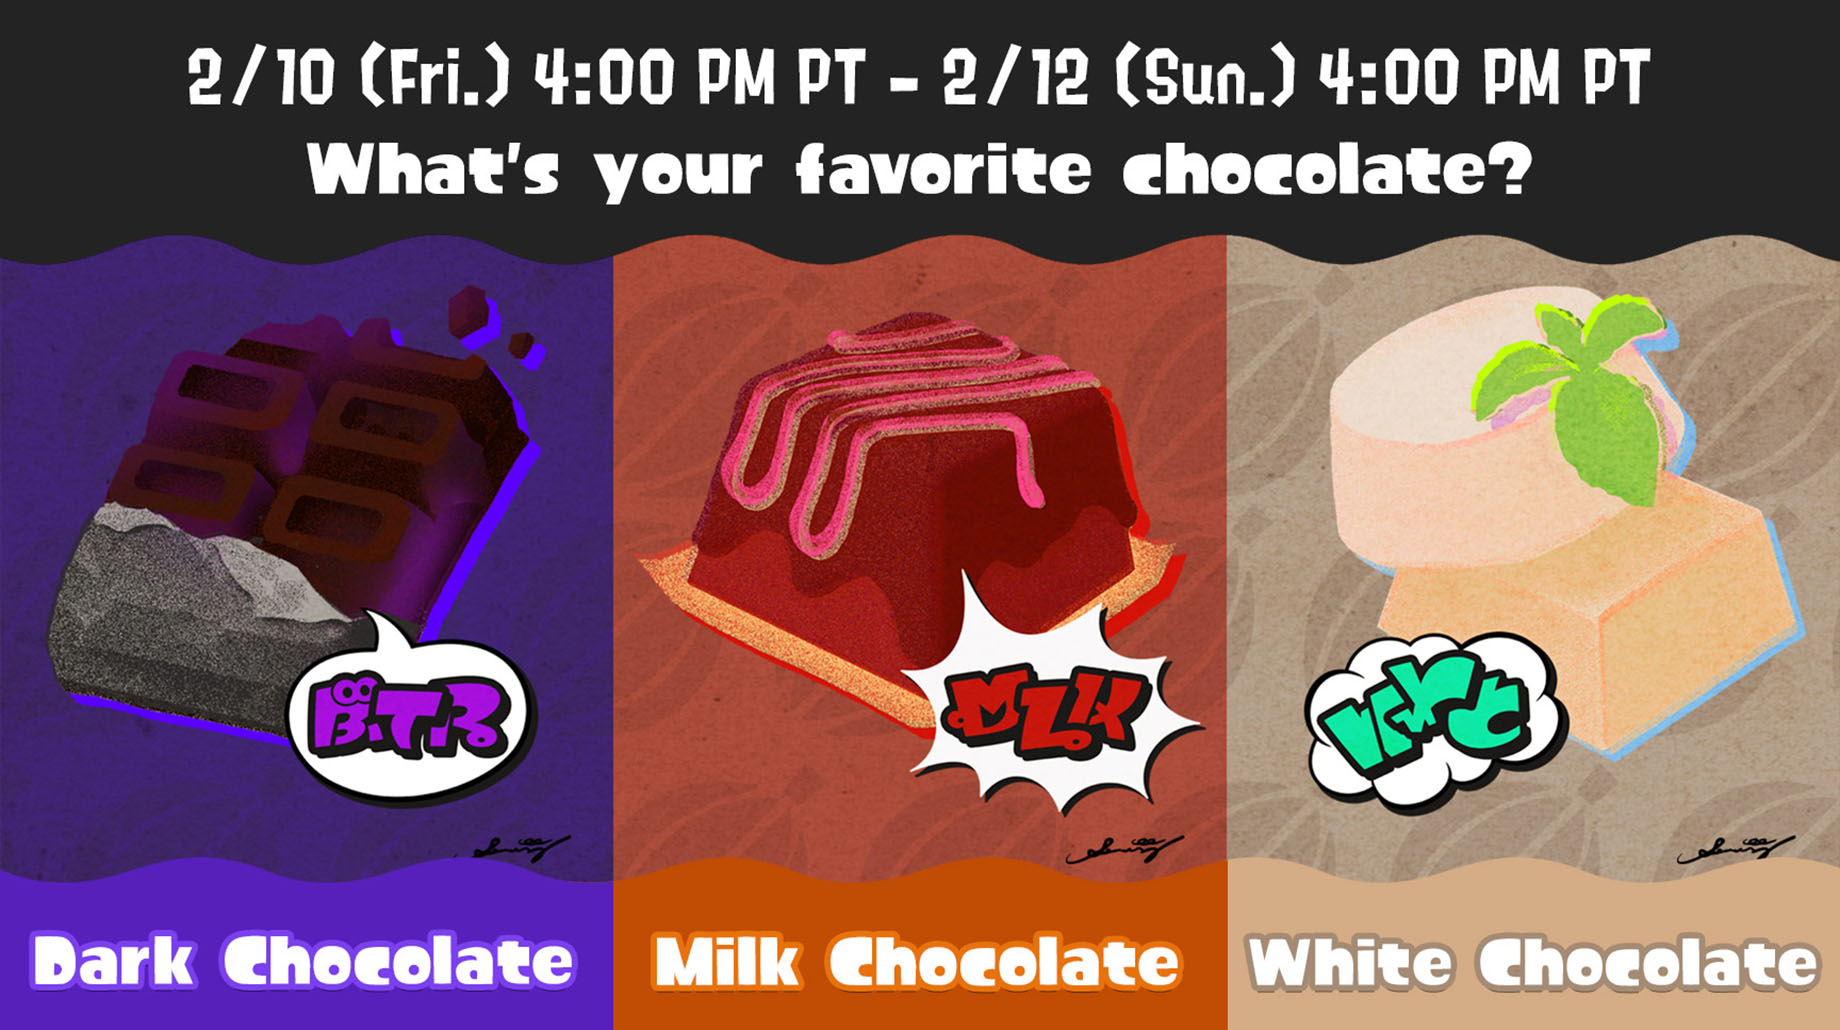 Signboard: What's your favorite chocolate? Dark chocolate, milk chocolate, or white chocolate?